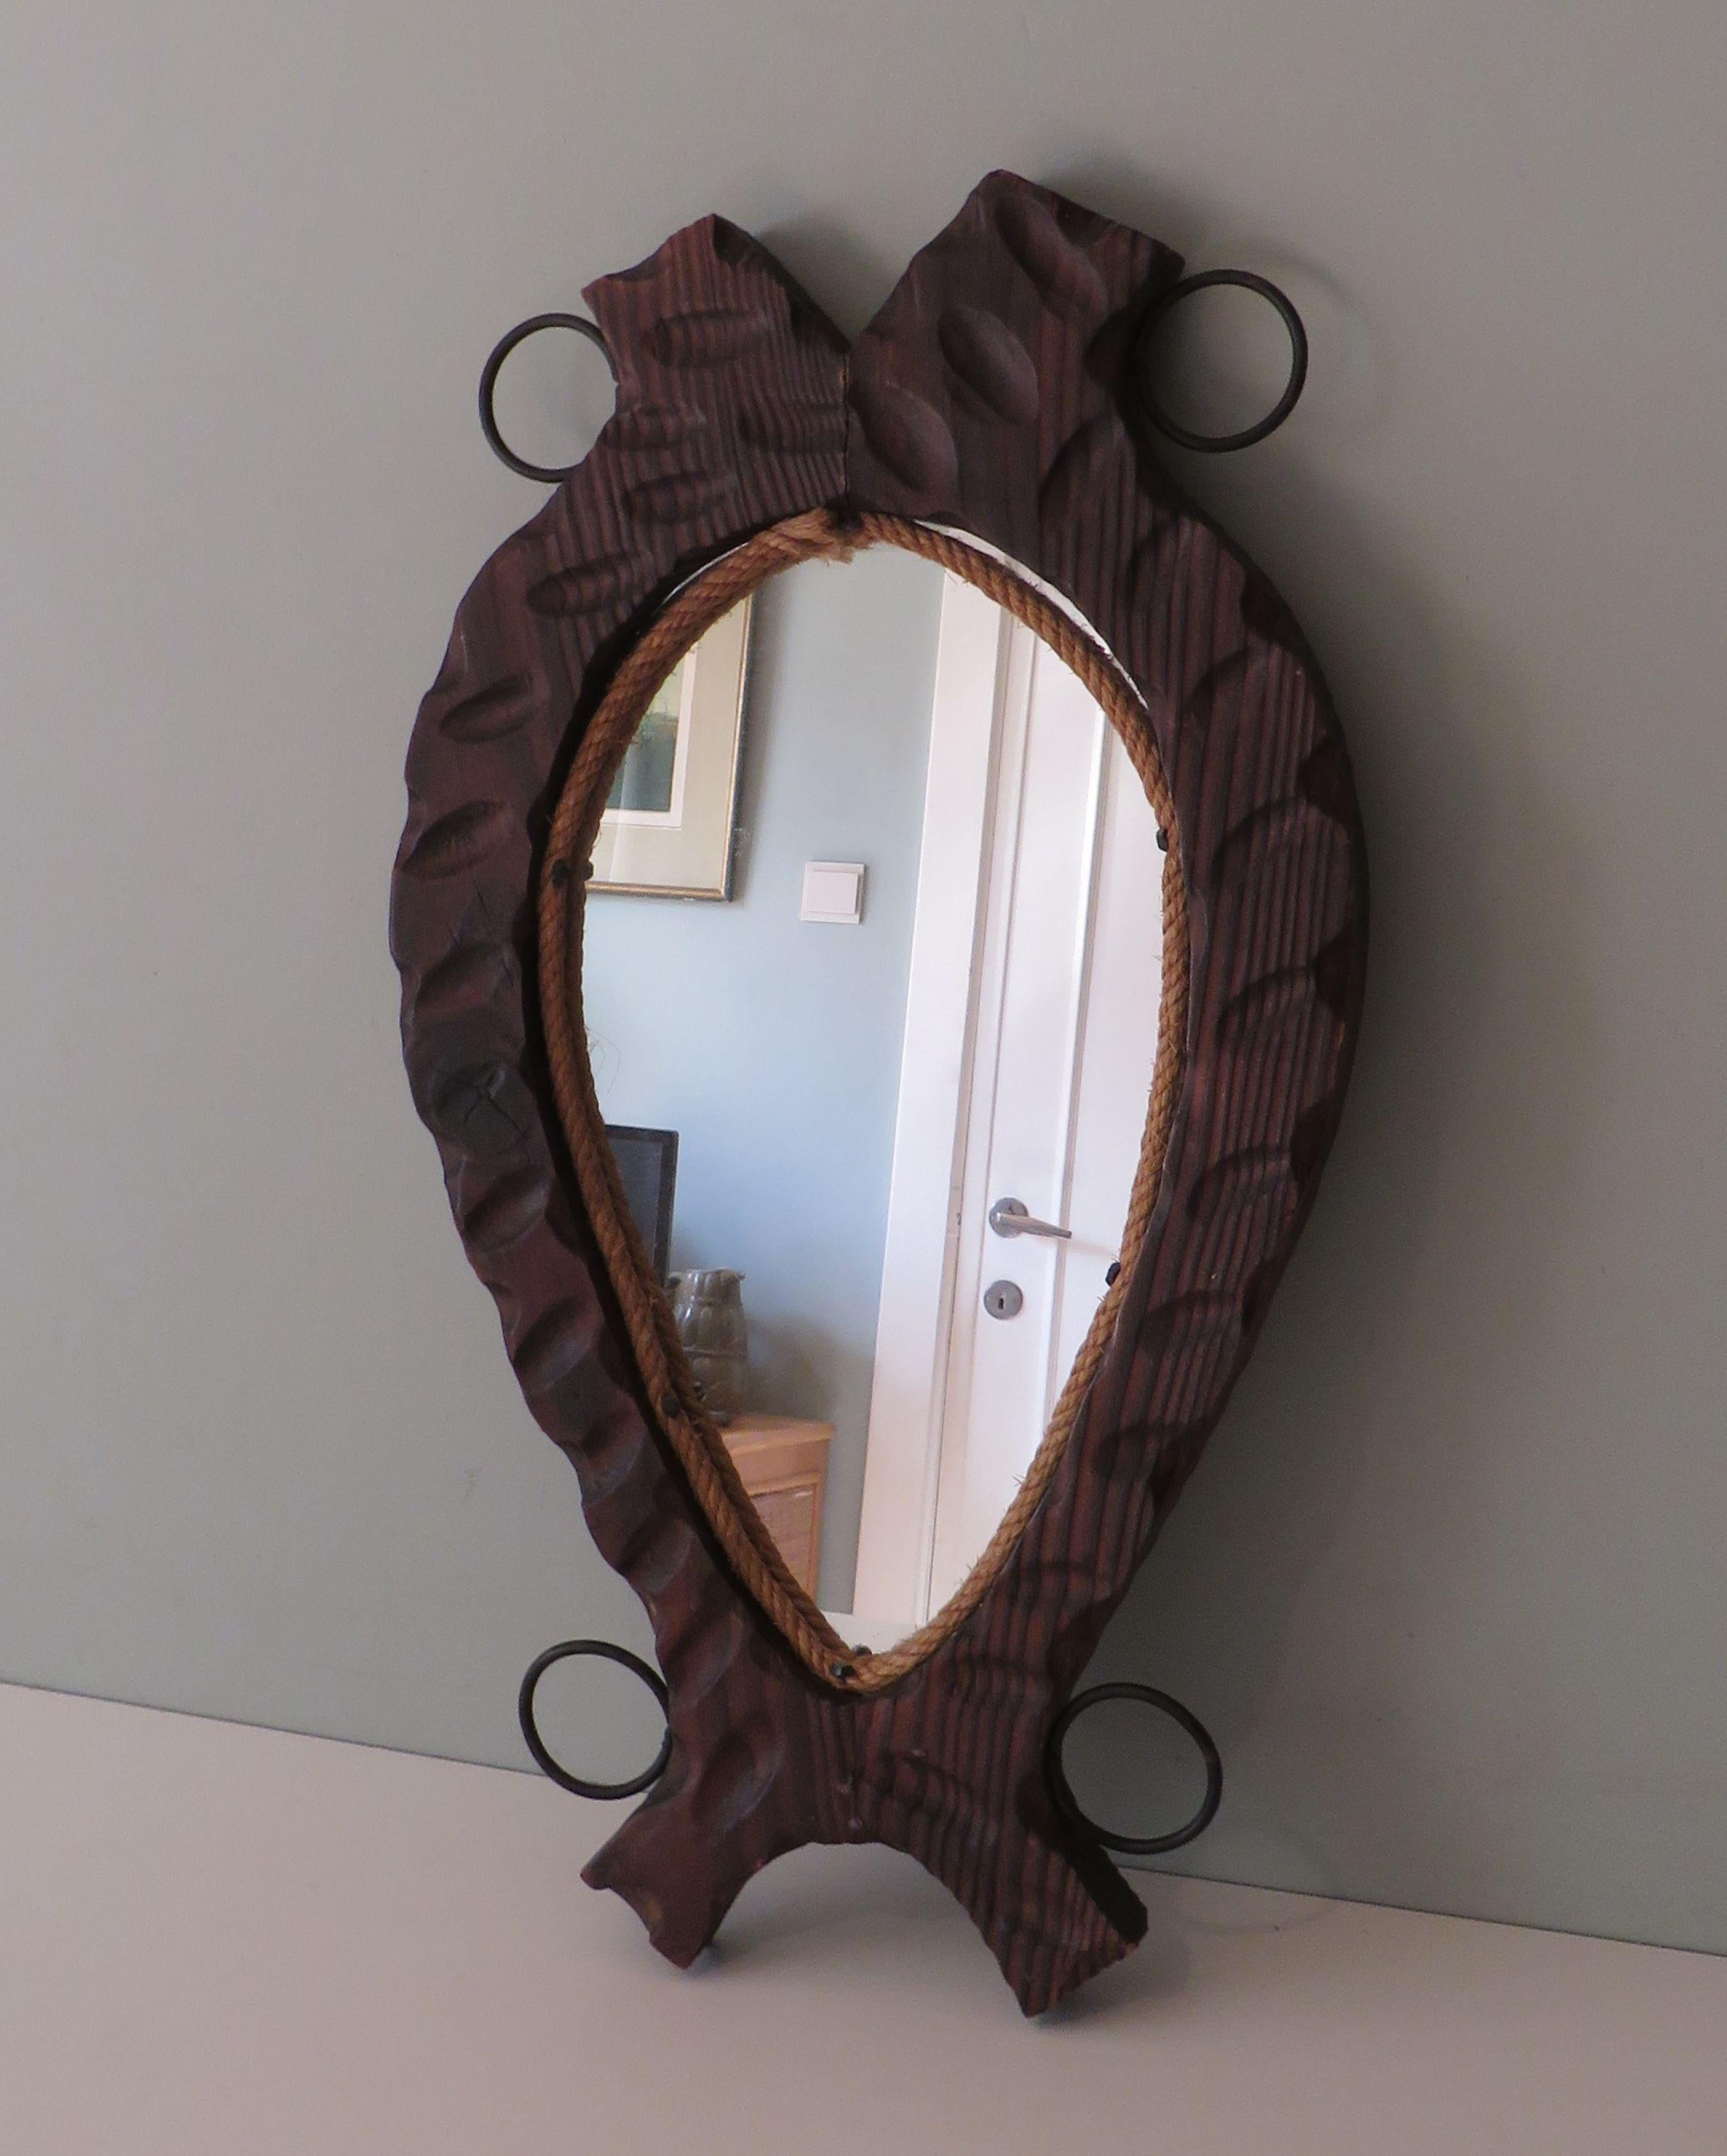 The mirror has a harness-shaped dark wooden hand-carved frame and
finished with natural cord that is attached with decorative black cast iron nails.
The mirror is also equipped with a hanging hook on the back.
The mirror is in good condition, the